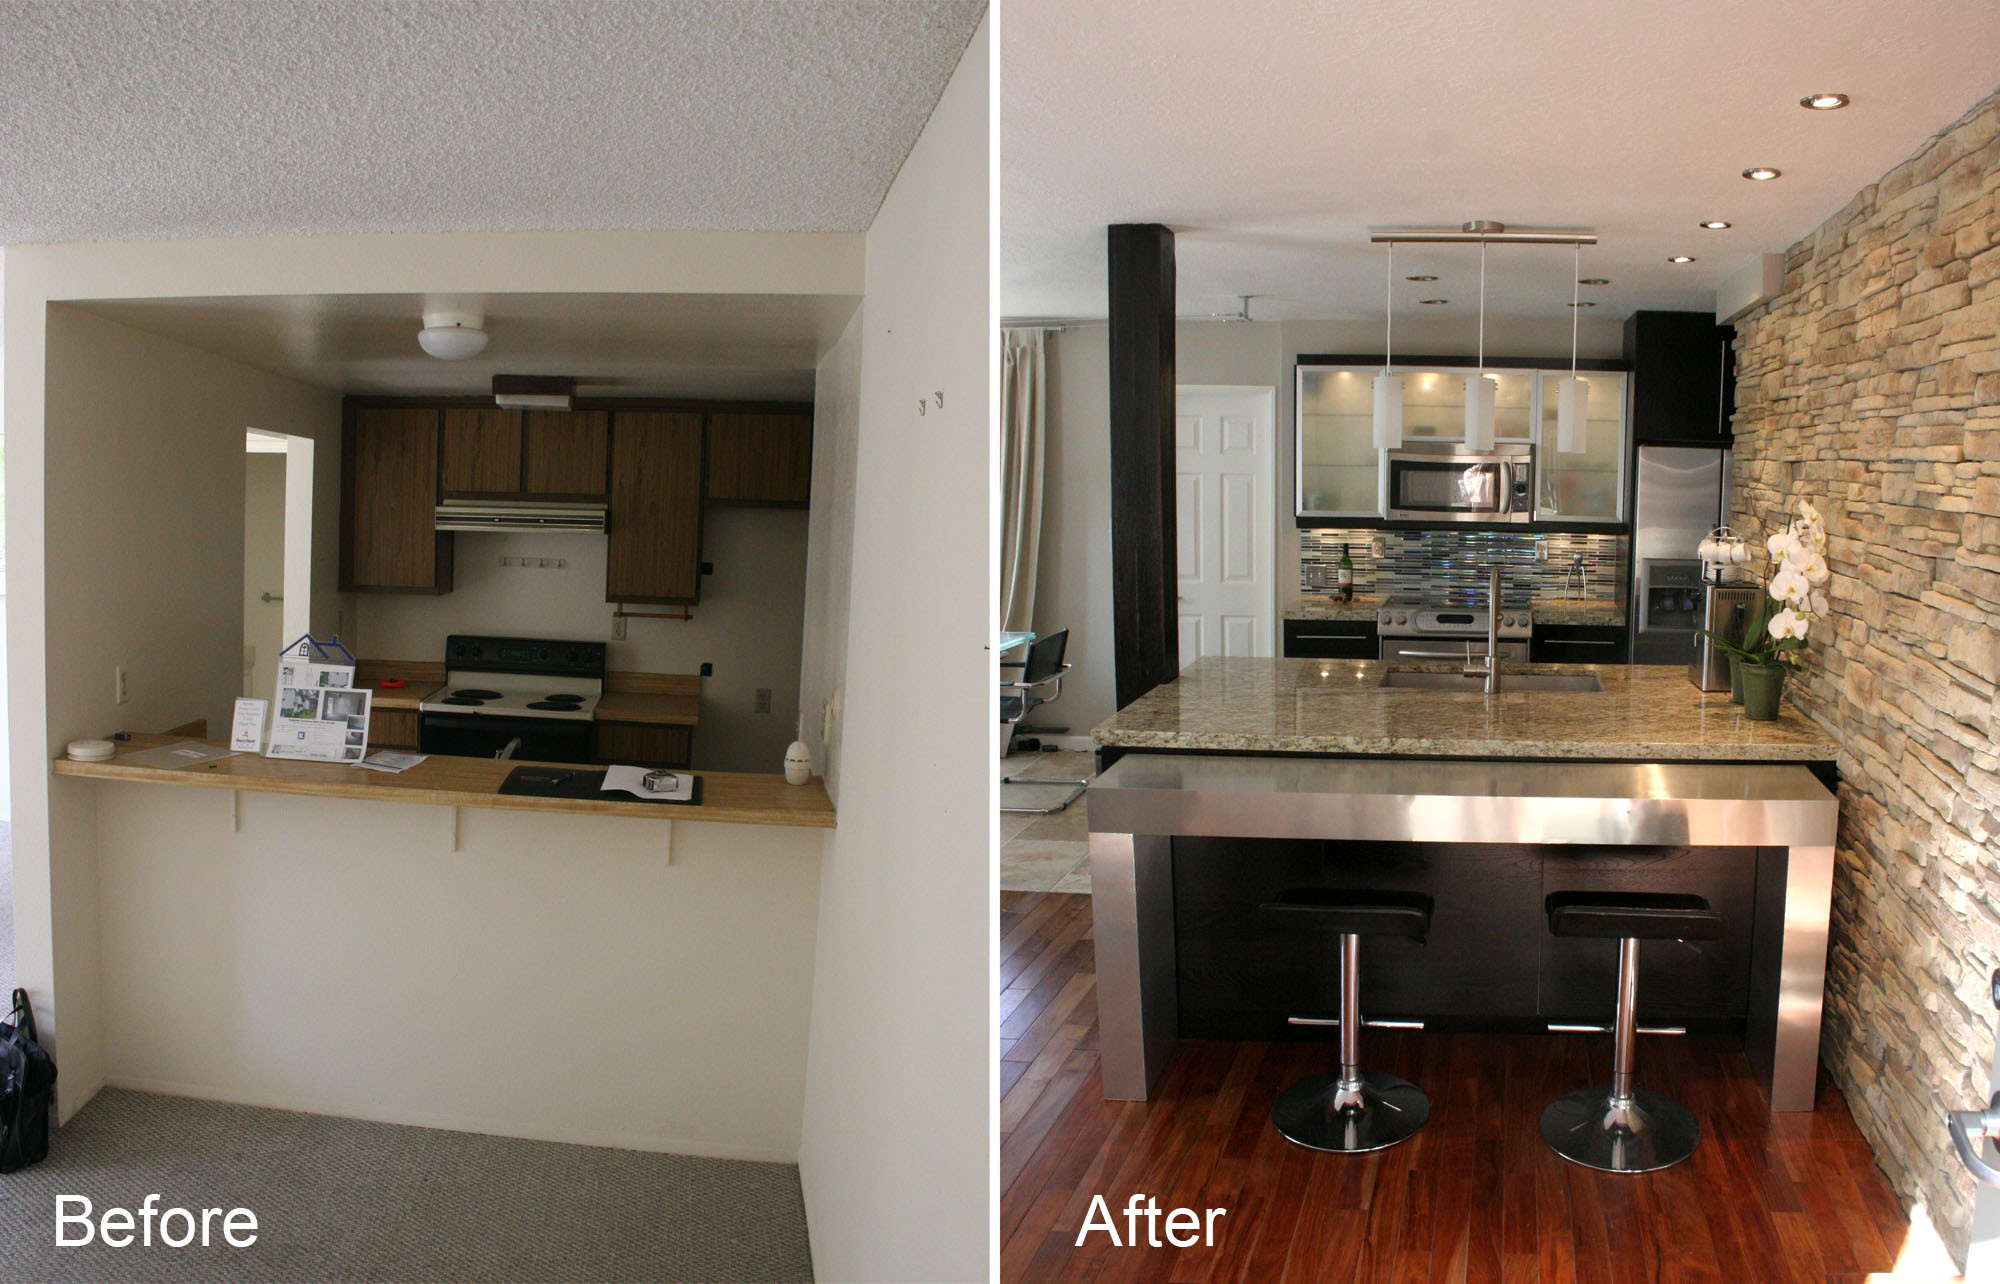 Kitchen Remodels Before And After
 Kitchen Planning and Design Kitchen remodeling in a